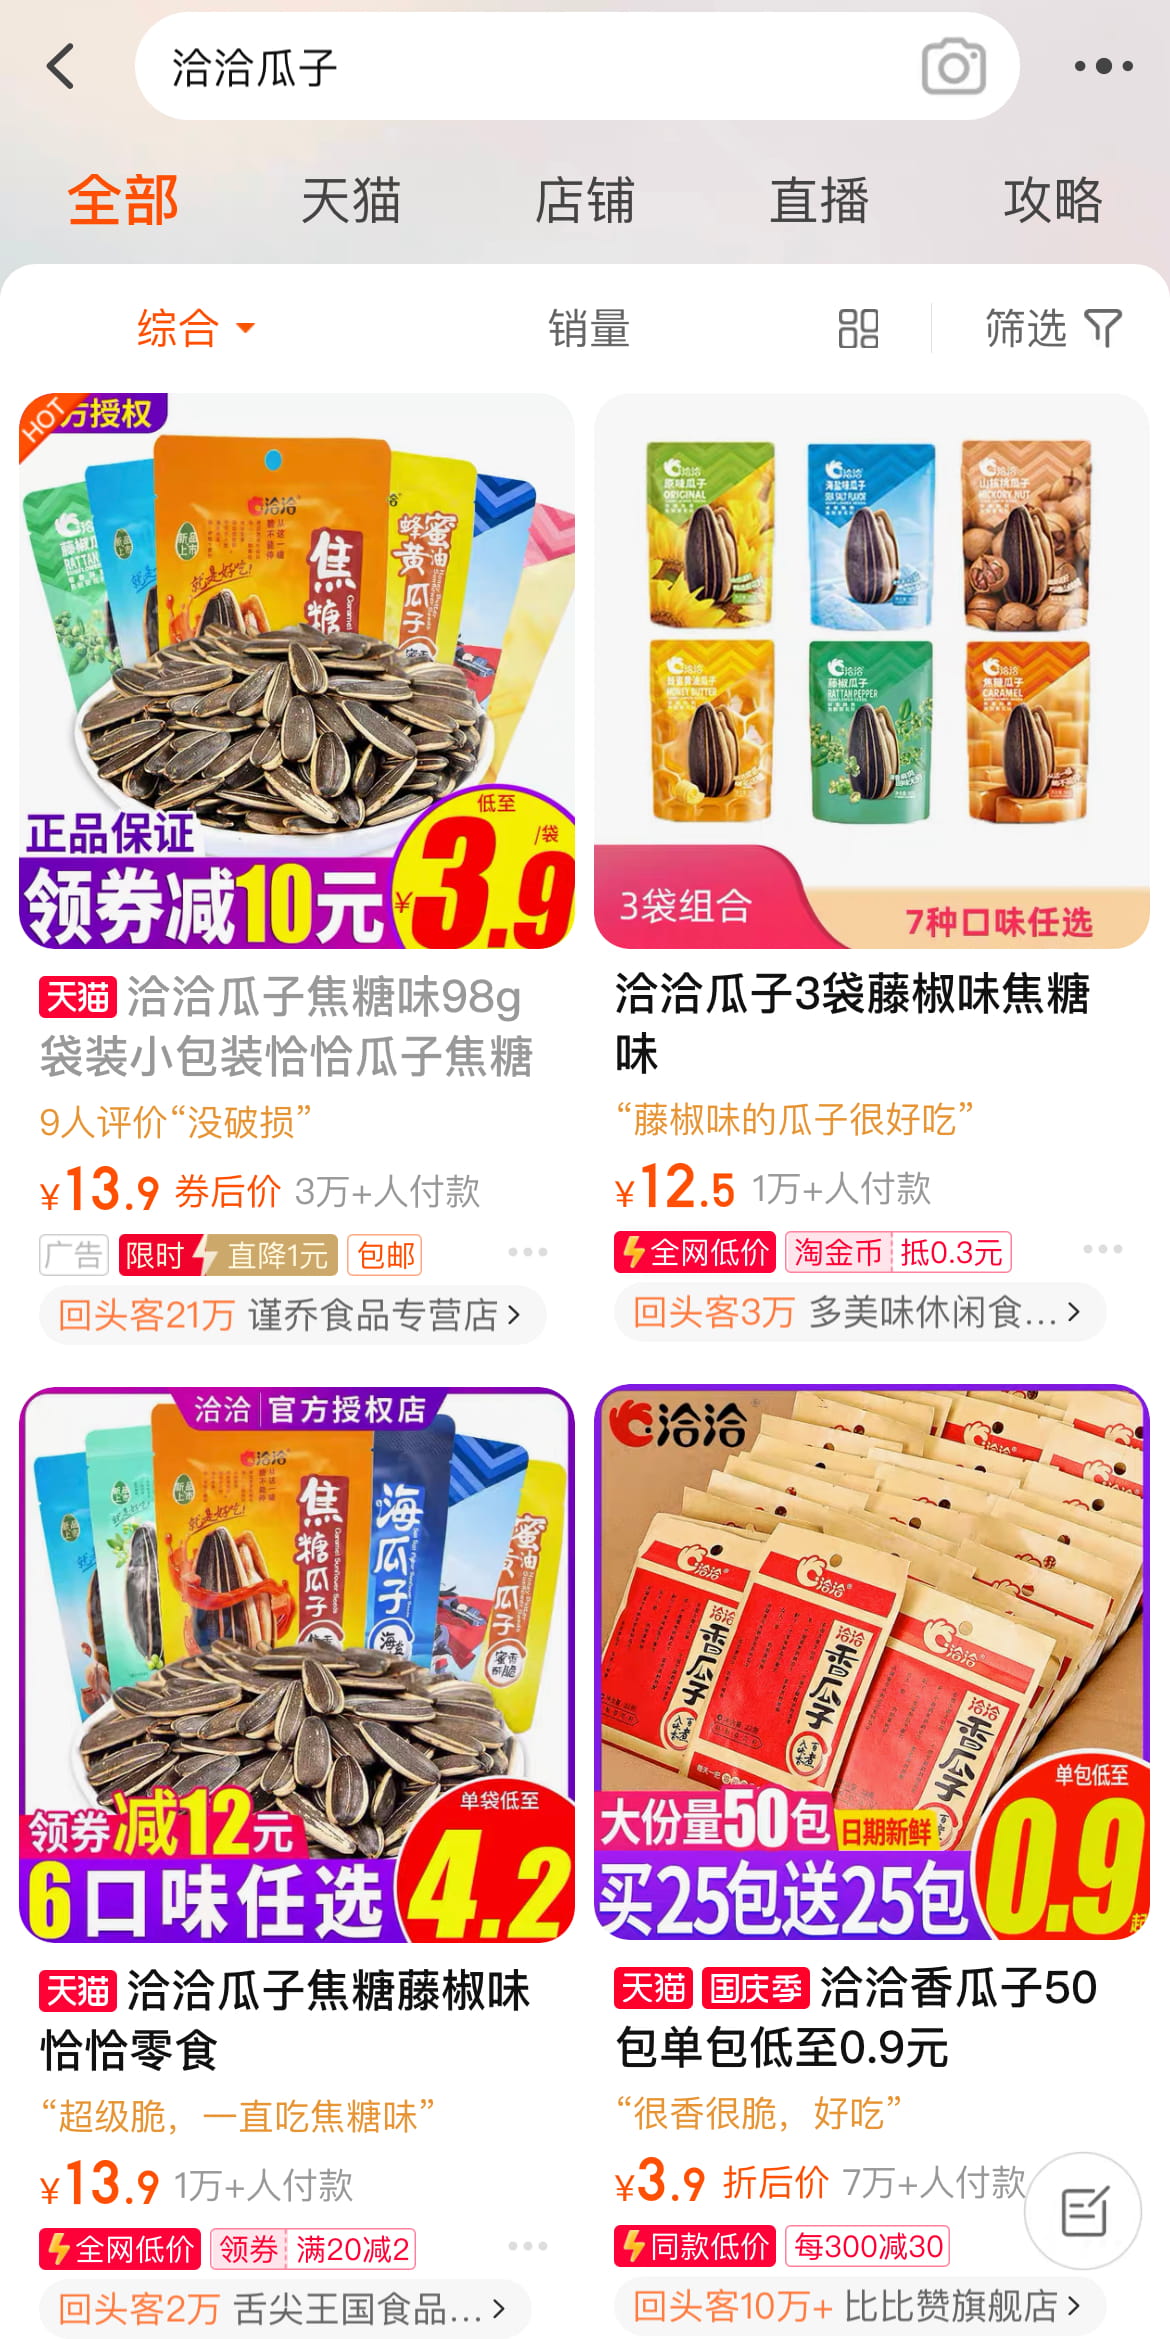 Taobao search engine for the qiaqia sunflower seeds